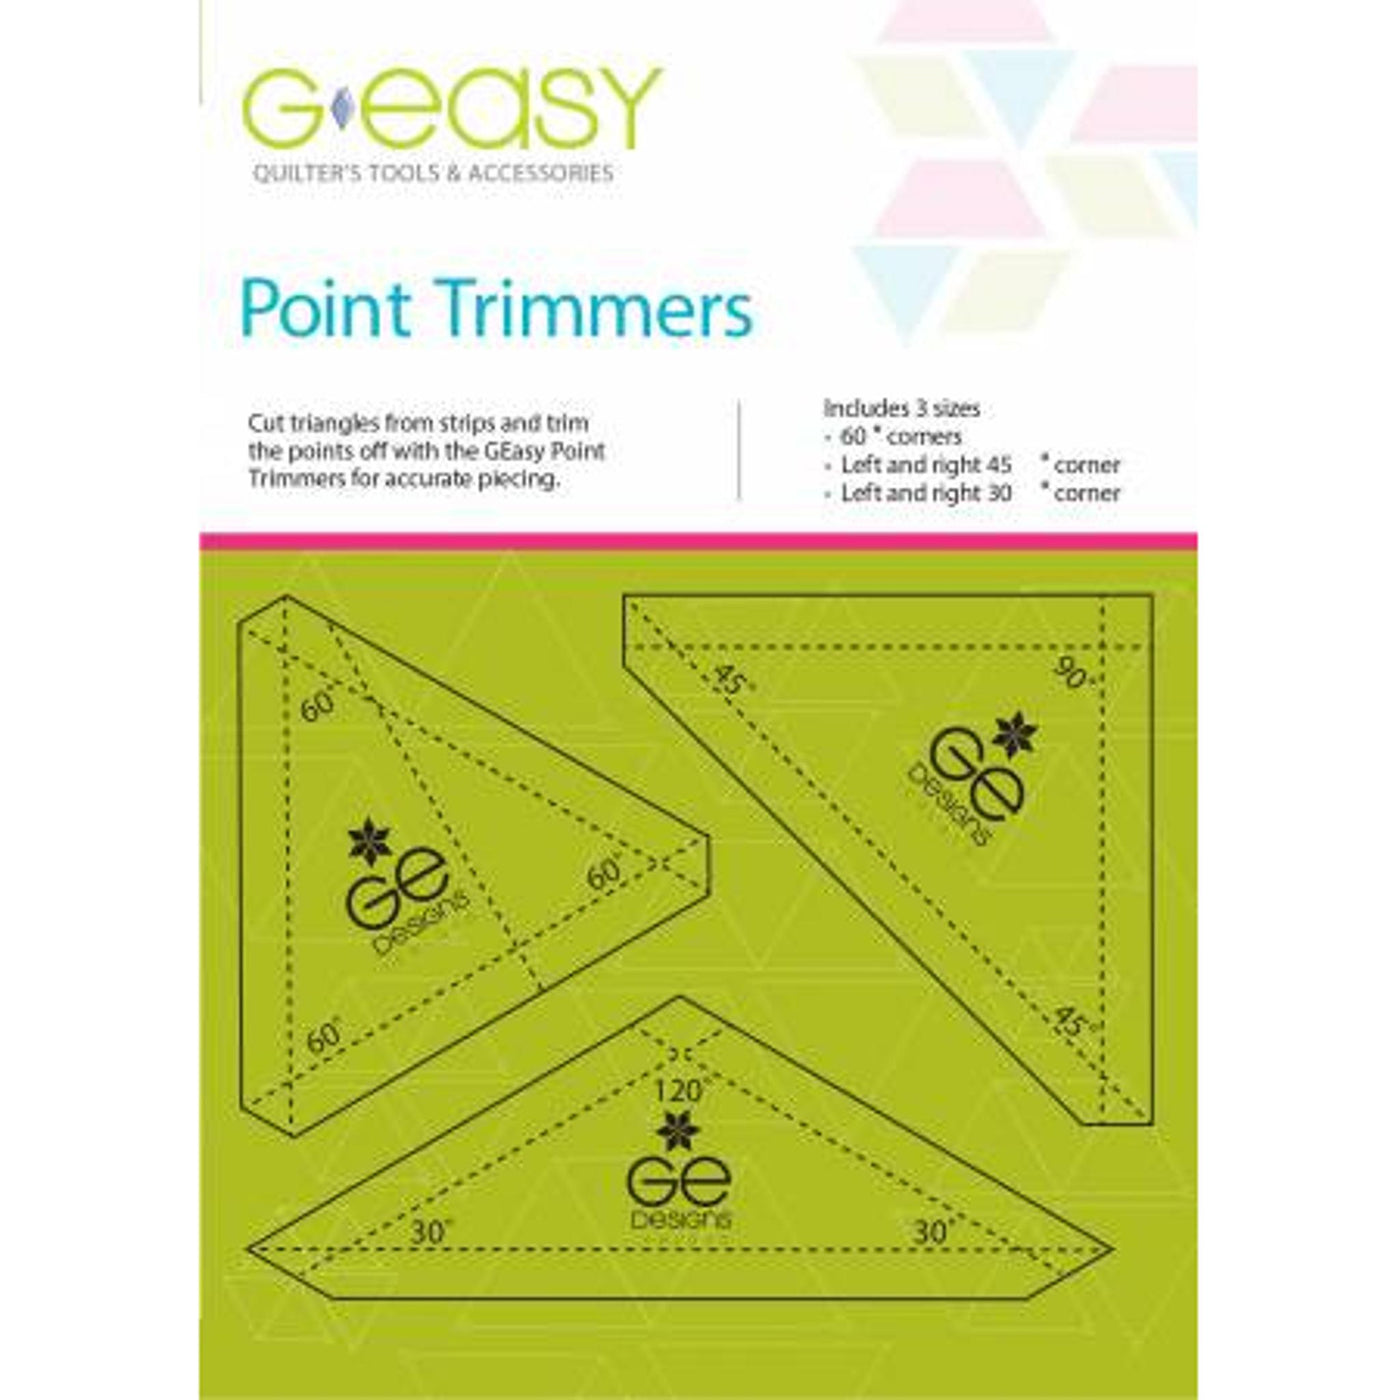 Point trimmers